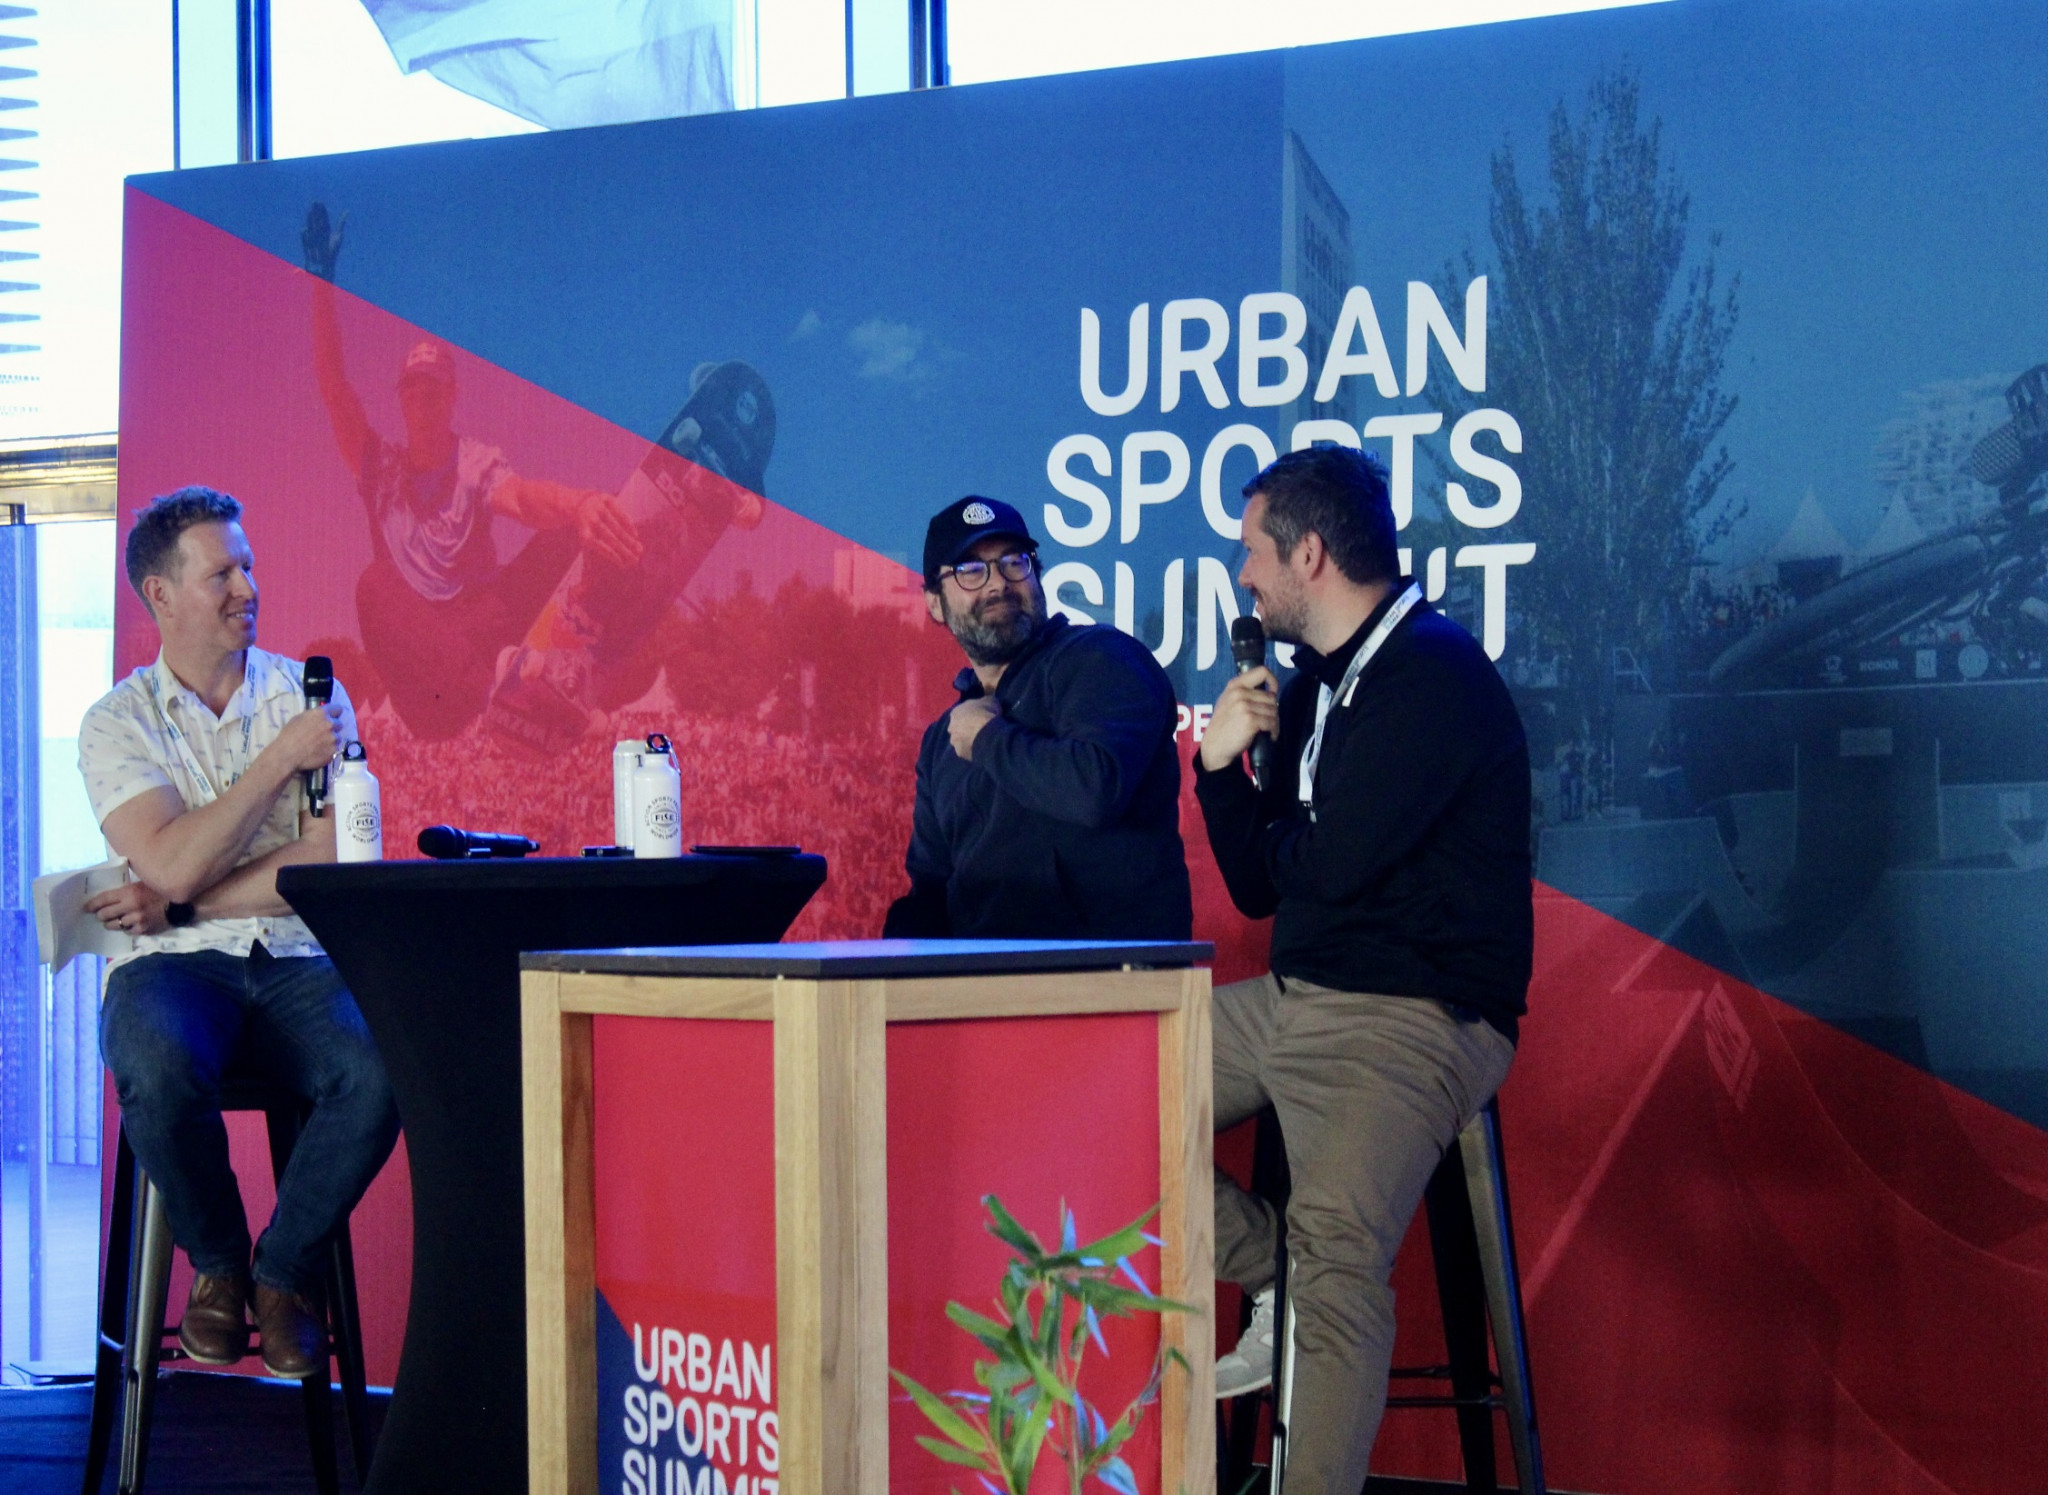 The first session focused on branded content, specifically authenticity and marketing, within the urban sports sphere ©Hurricane-UrbanSportsSummit